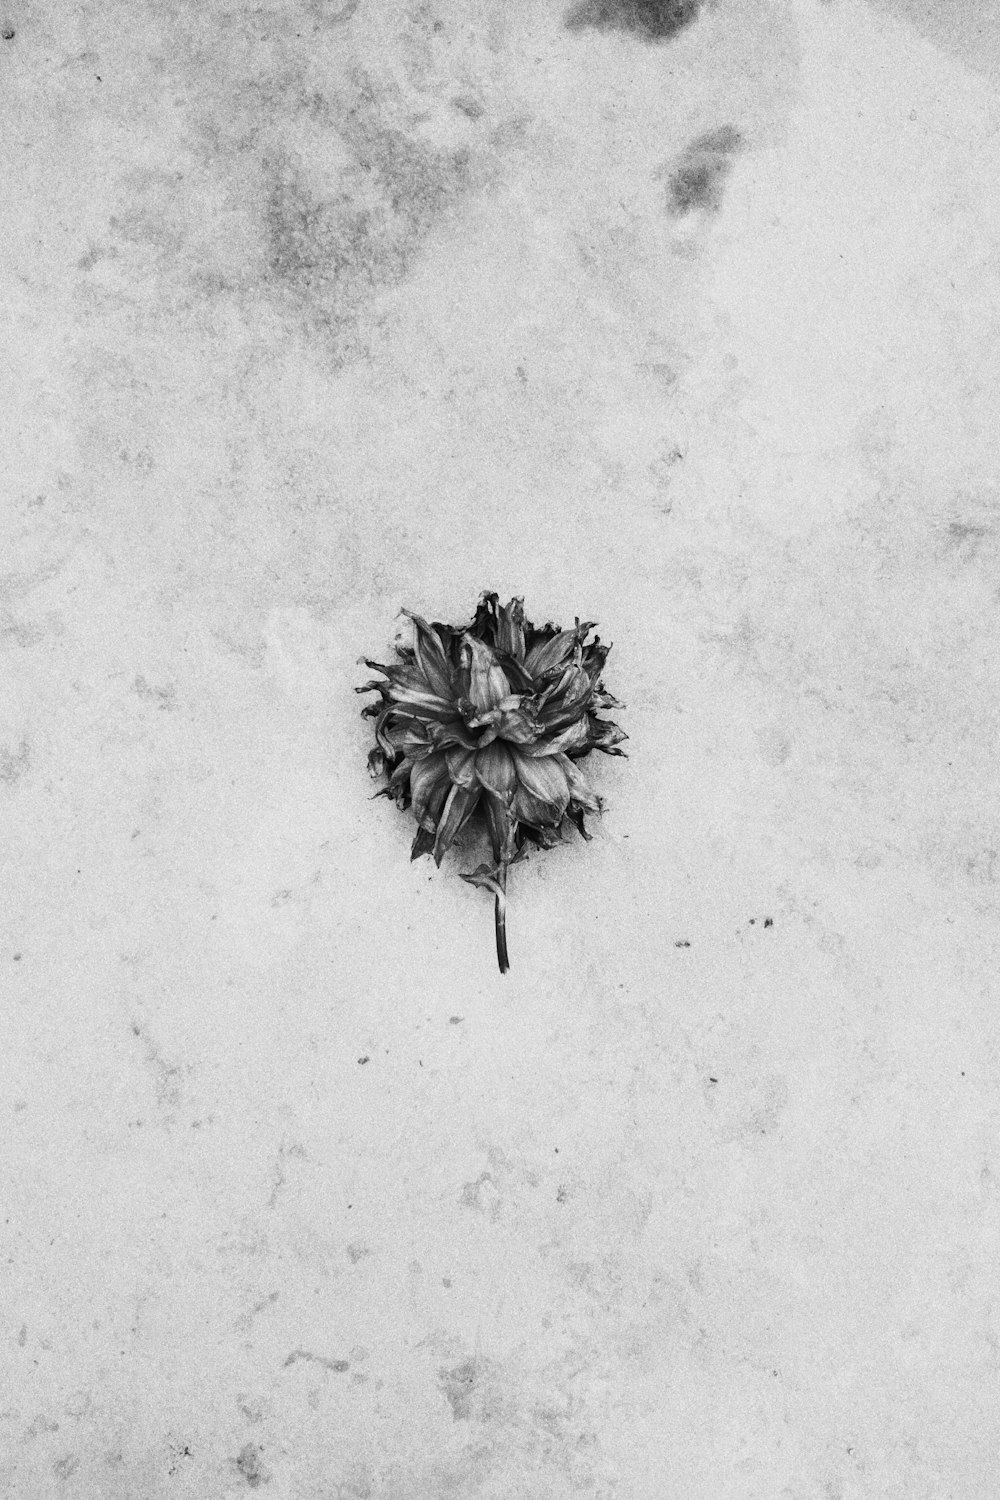 a single flower laying on the ground in the snow